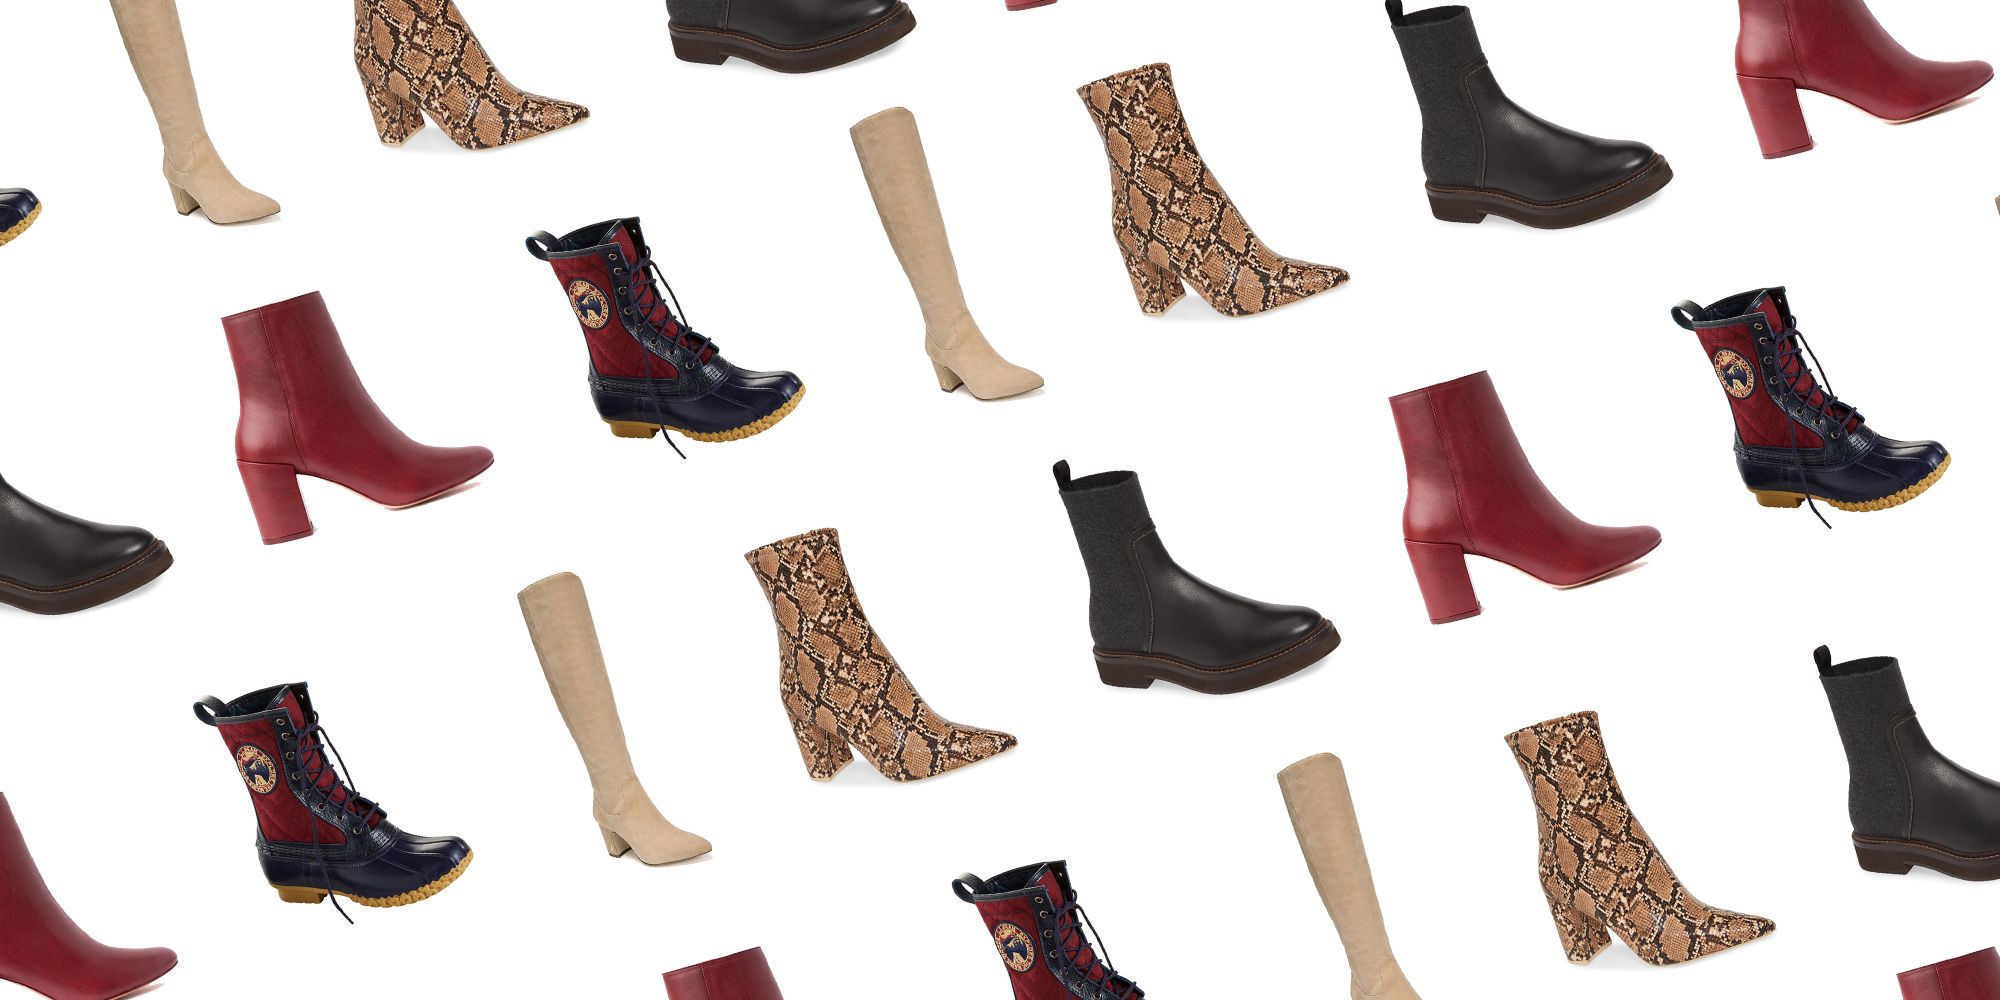 15 Most Stylish Winter Boots For Women 